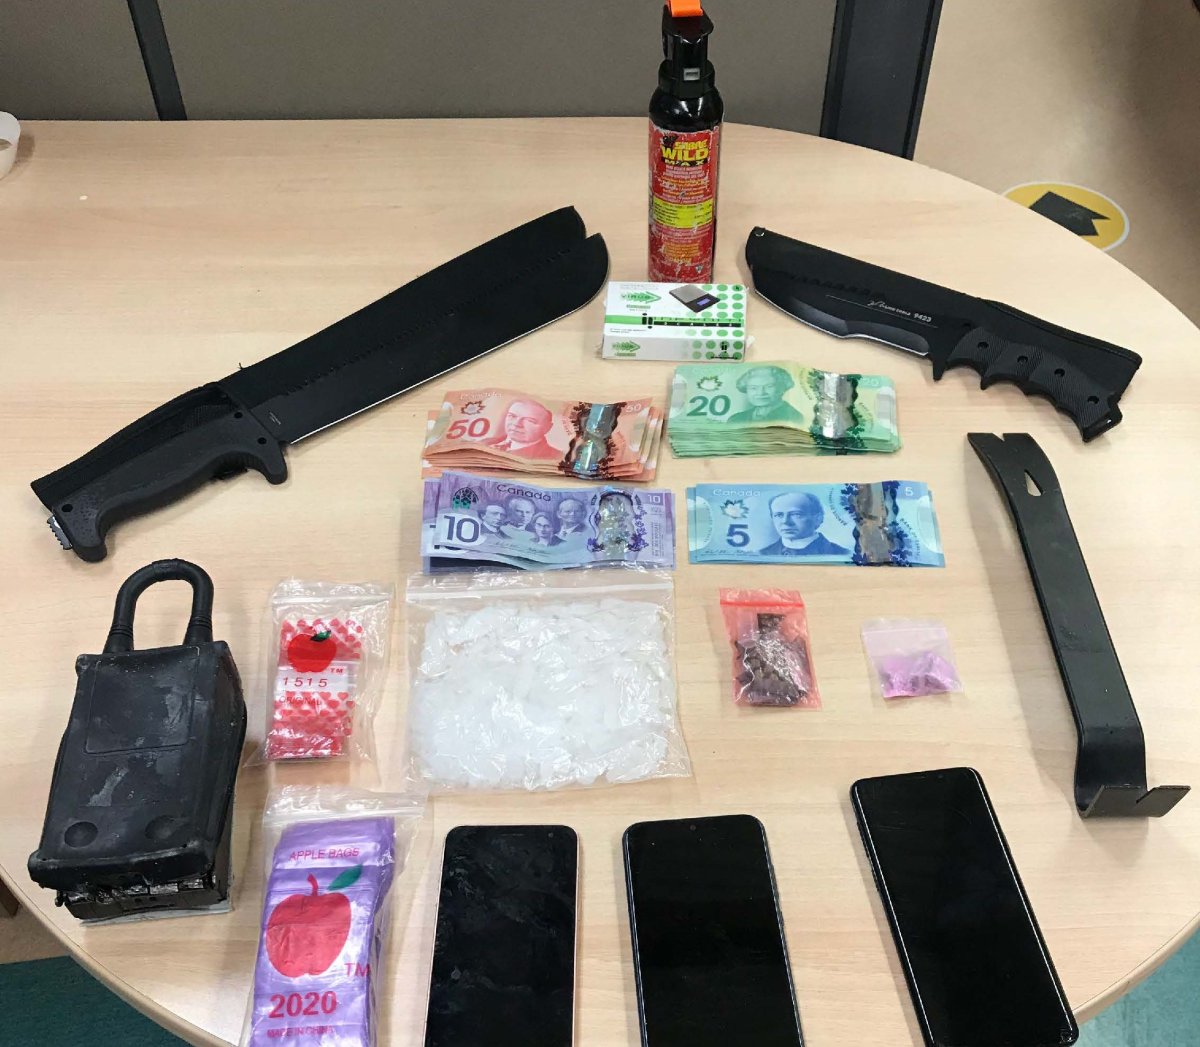 Contraband seized by Selkirk RCMP.